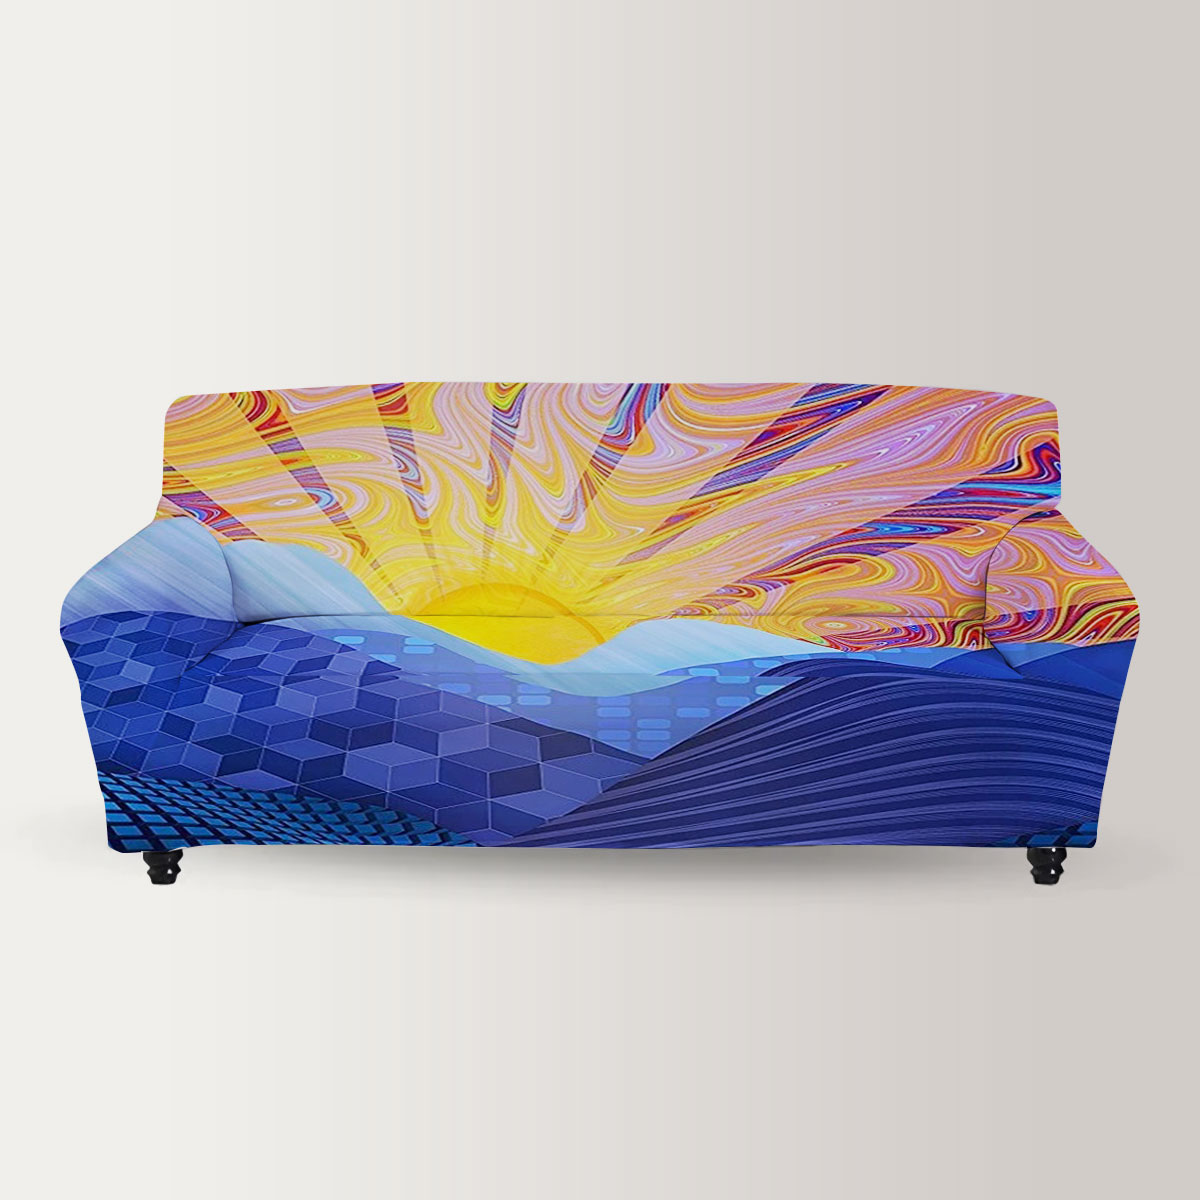 Psychedelic Sunrise Sofa Cover